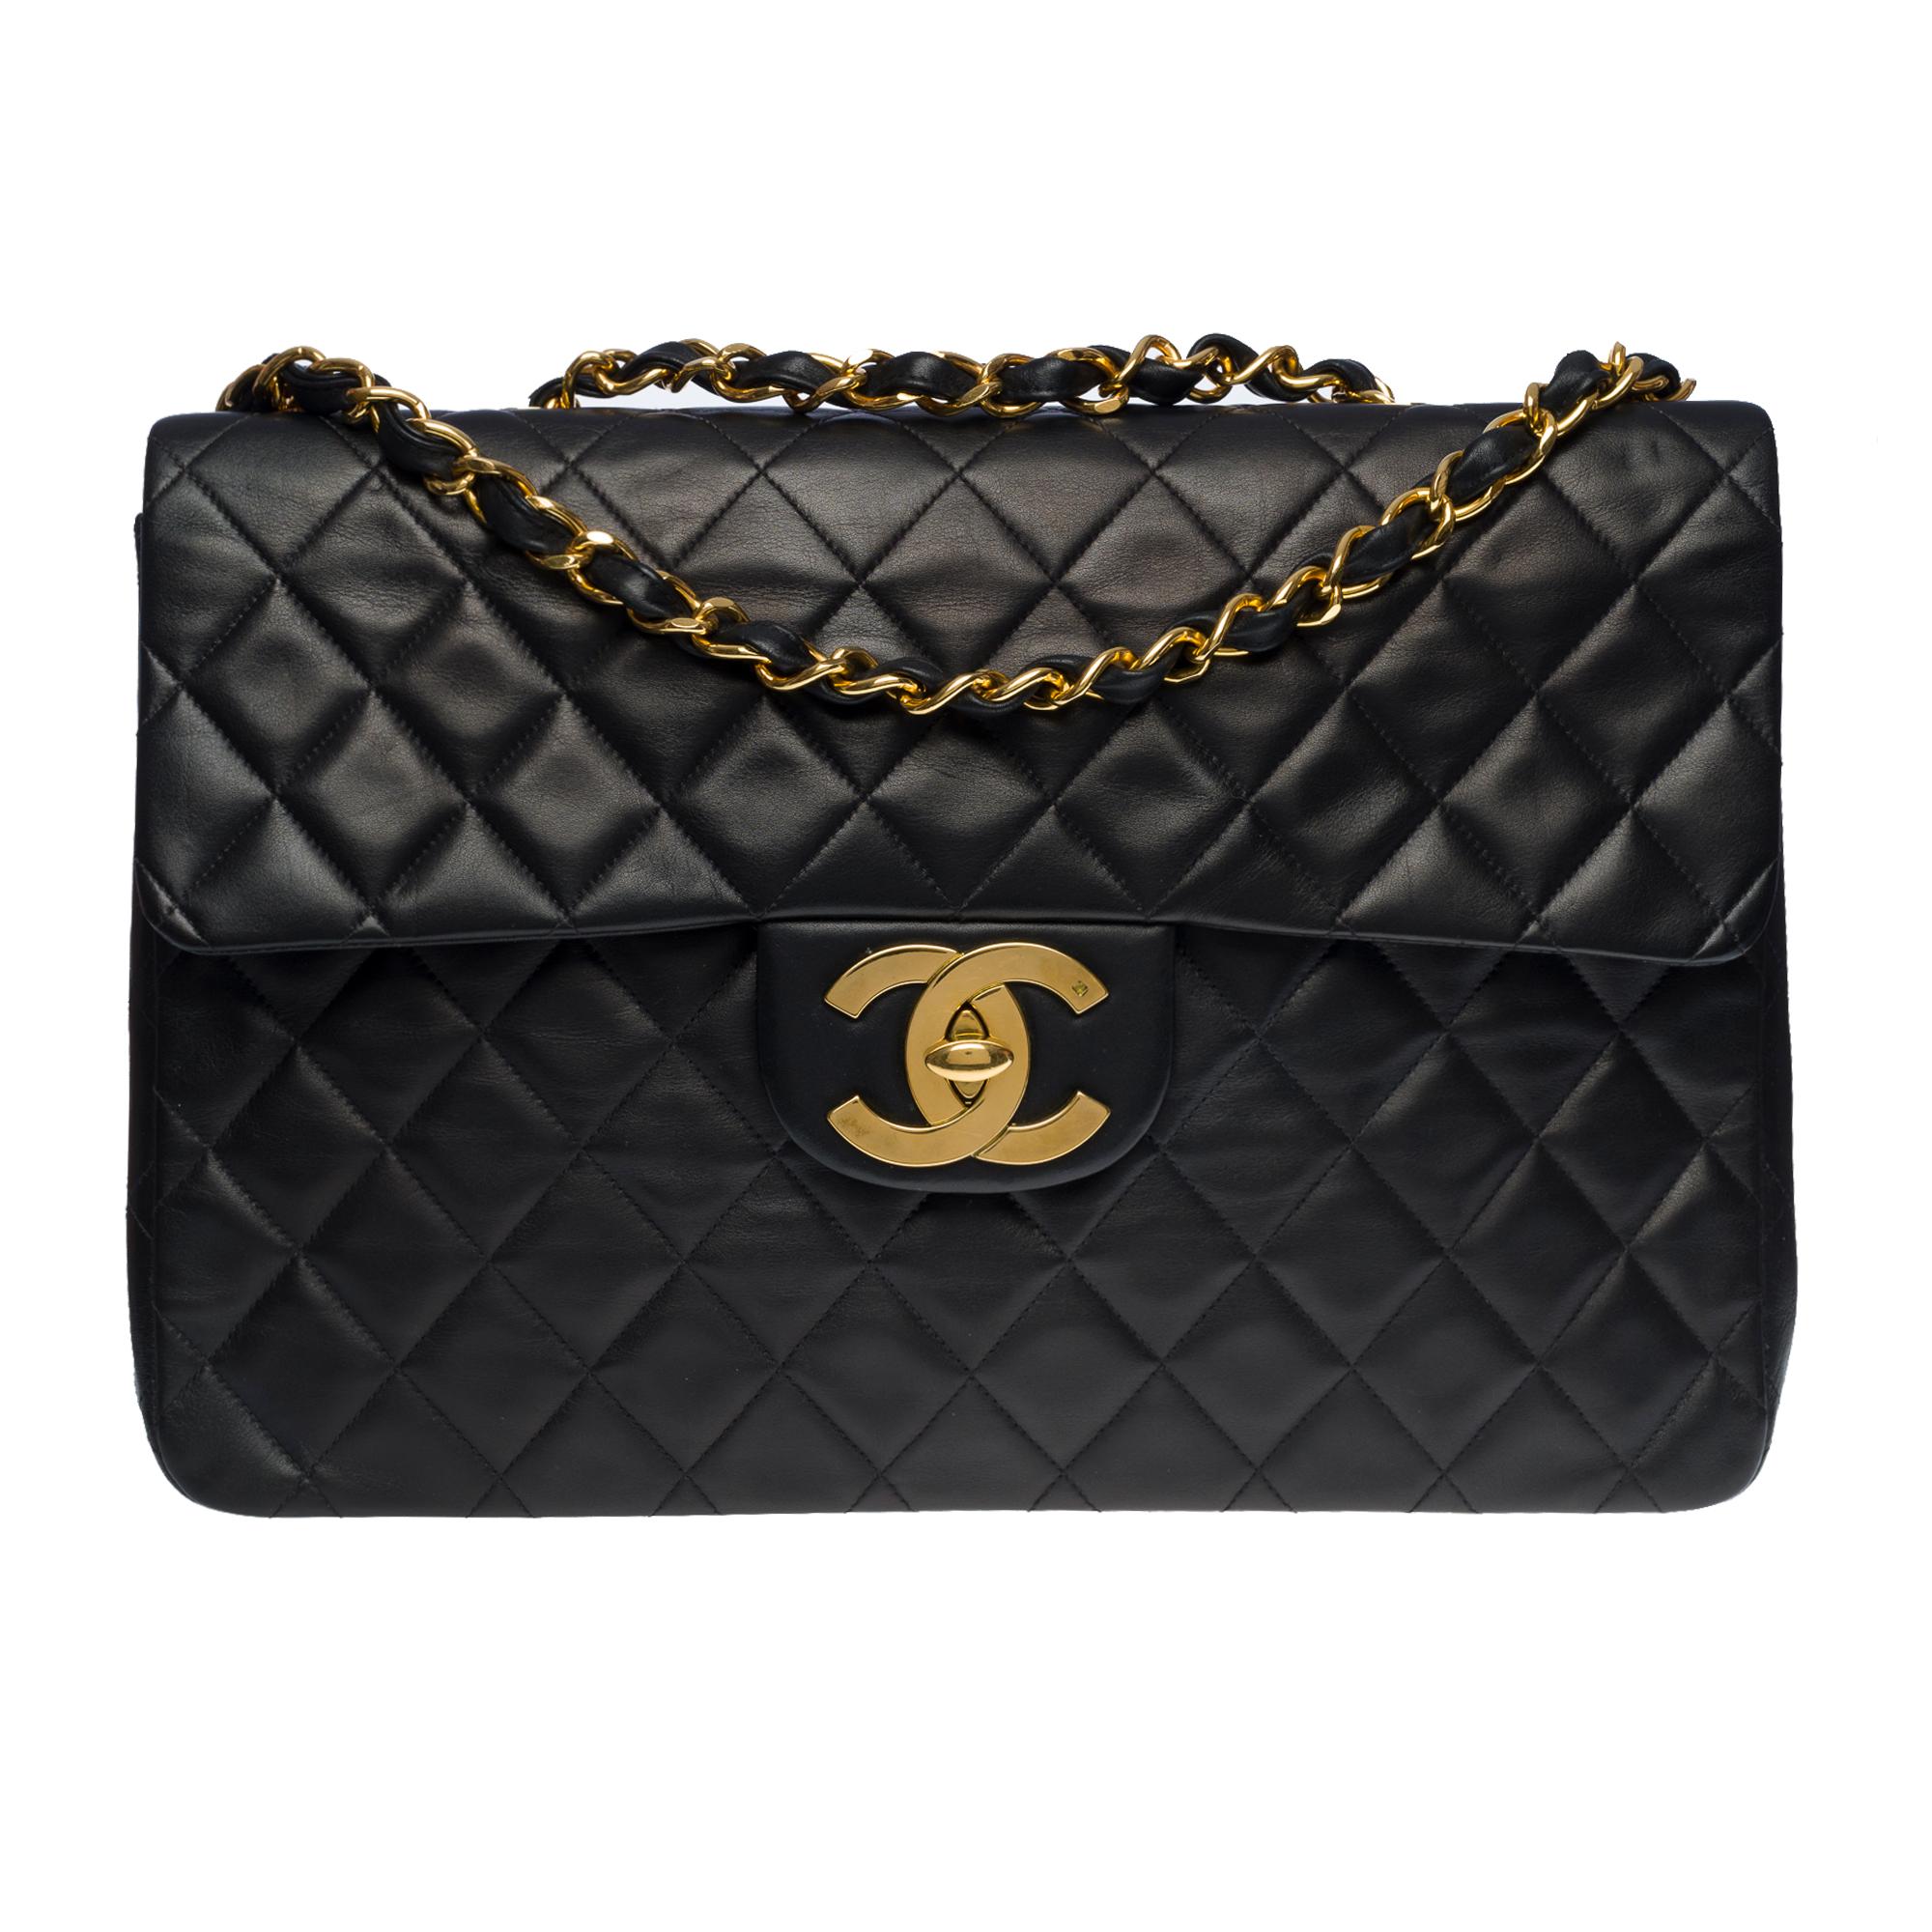 Majestic Chanel Timeless/Classic Maxi Jumbo single shoulder flap bag in black quilted lambskin leather, gold-tone metal hardware, a gold-tone metal chain handle interwoven with black leather for a shoulder and shoulder strap
A patch pocket on the